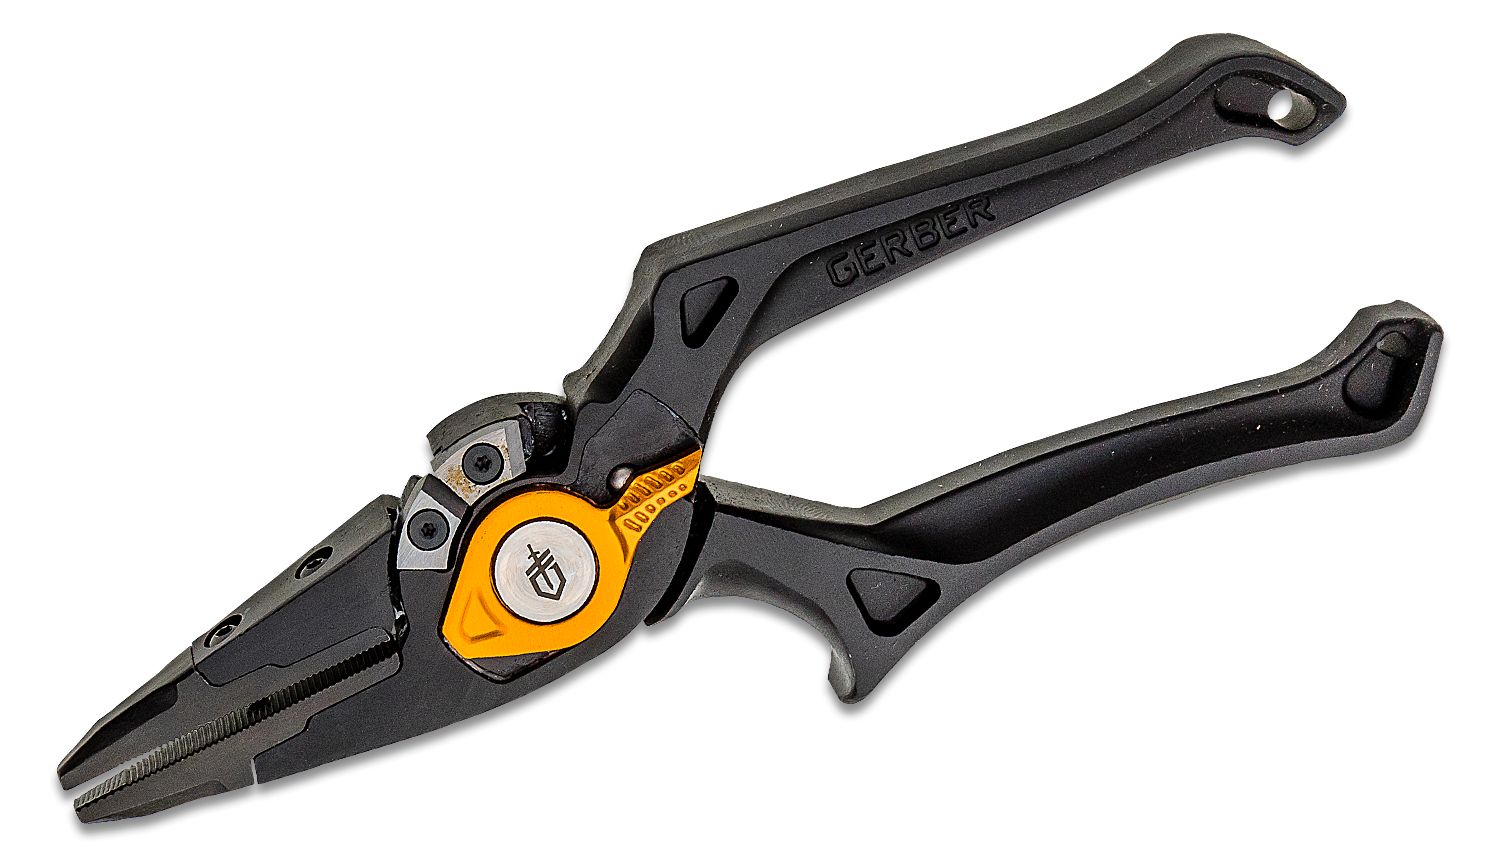 Gerber Fishing Series Magniplier 7.5 Locking Pliers - KnifeCenter -  31-003137 - Discontinued